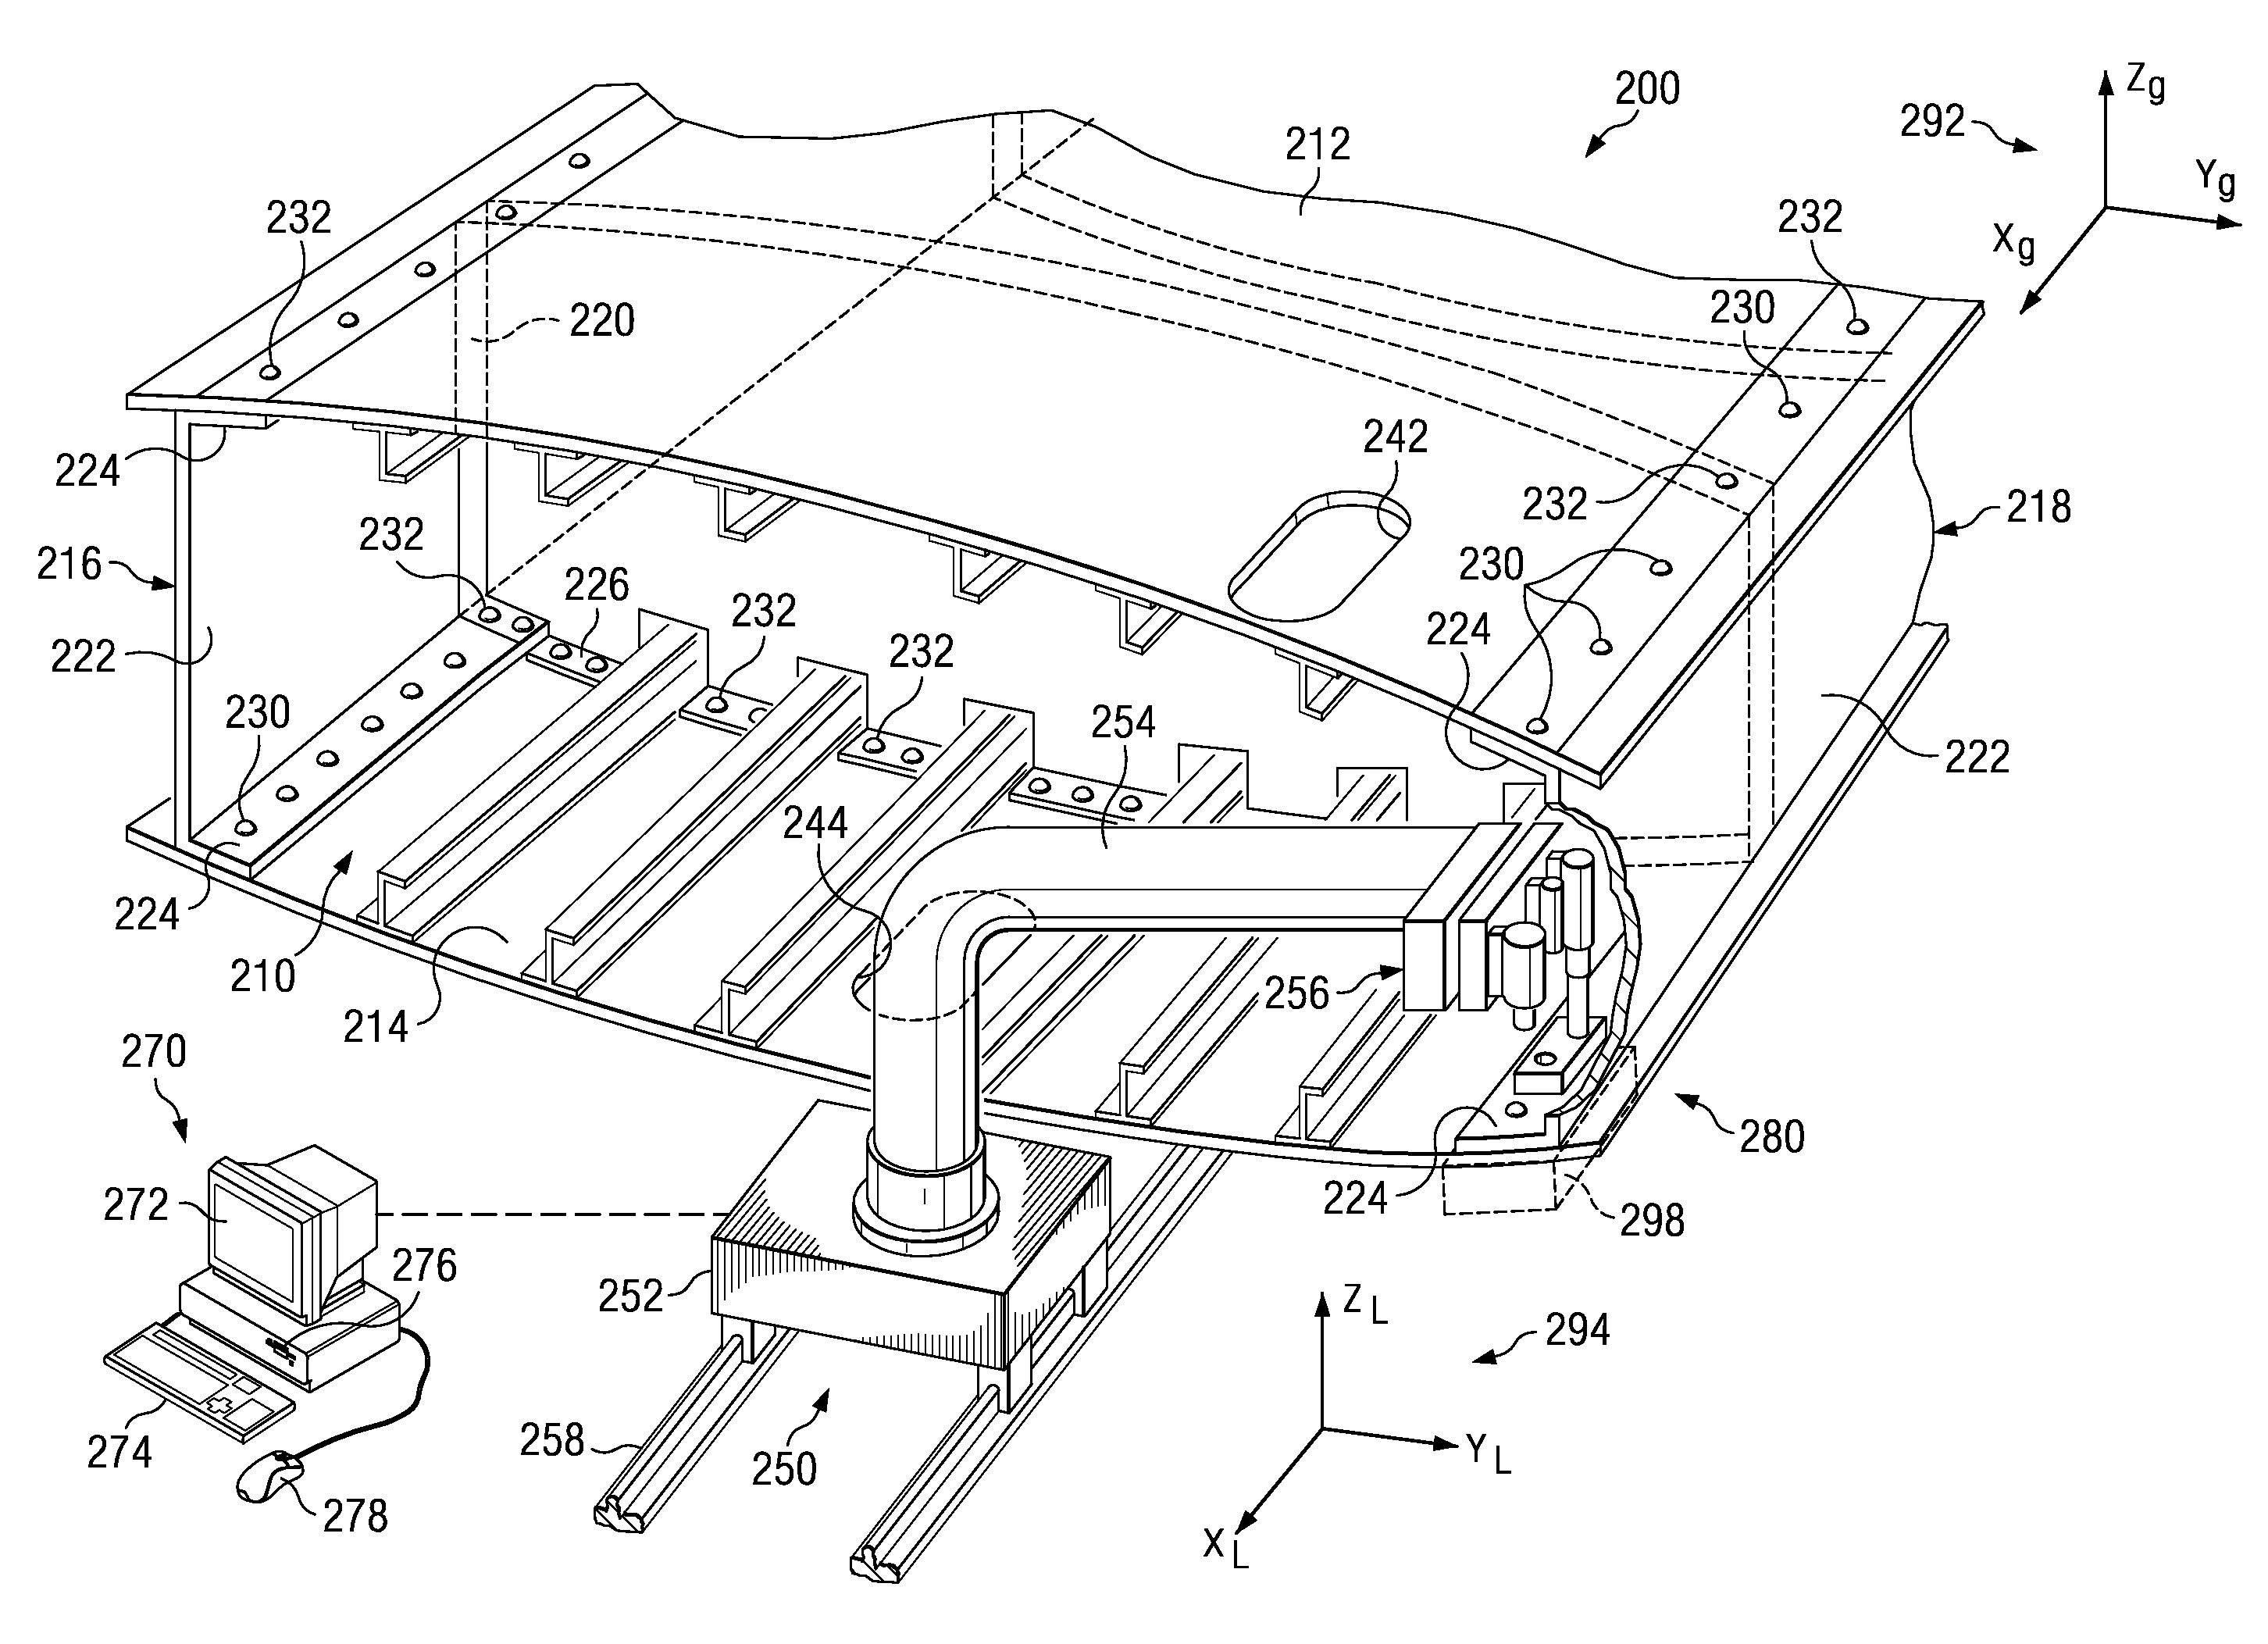 Robot-deployed assembly tool and method for installing fasteners in aircraft structures